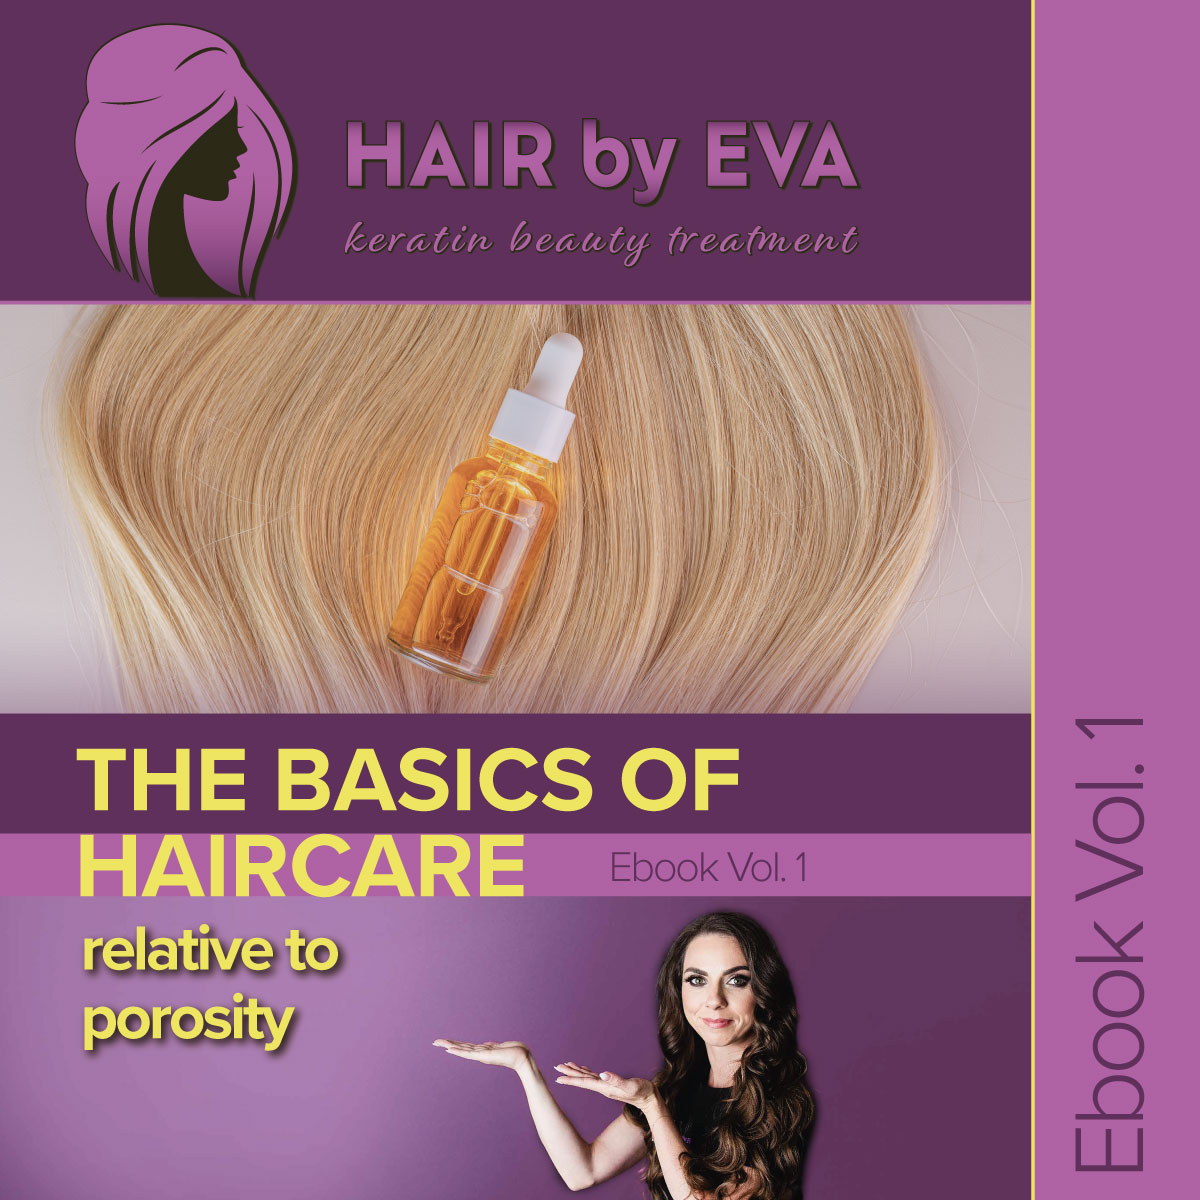 Ebook The basics of haircare relative to porosity